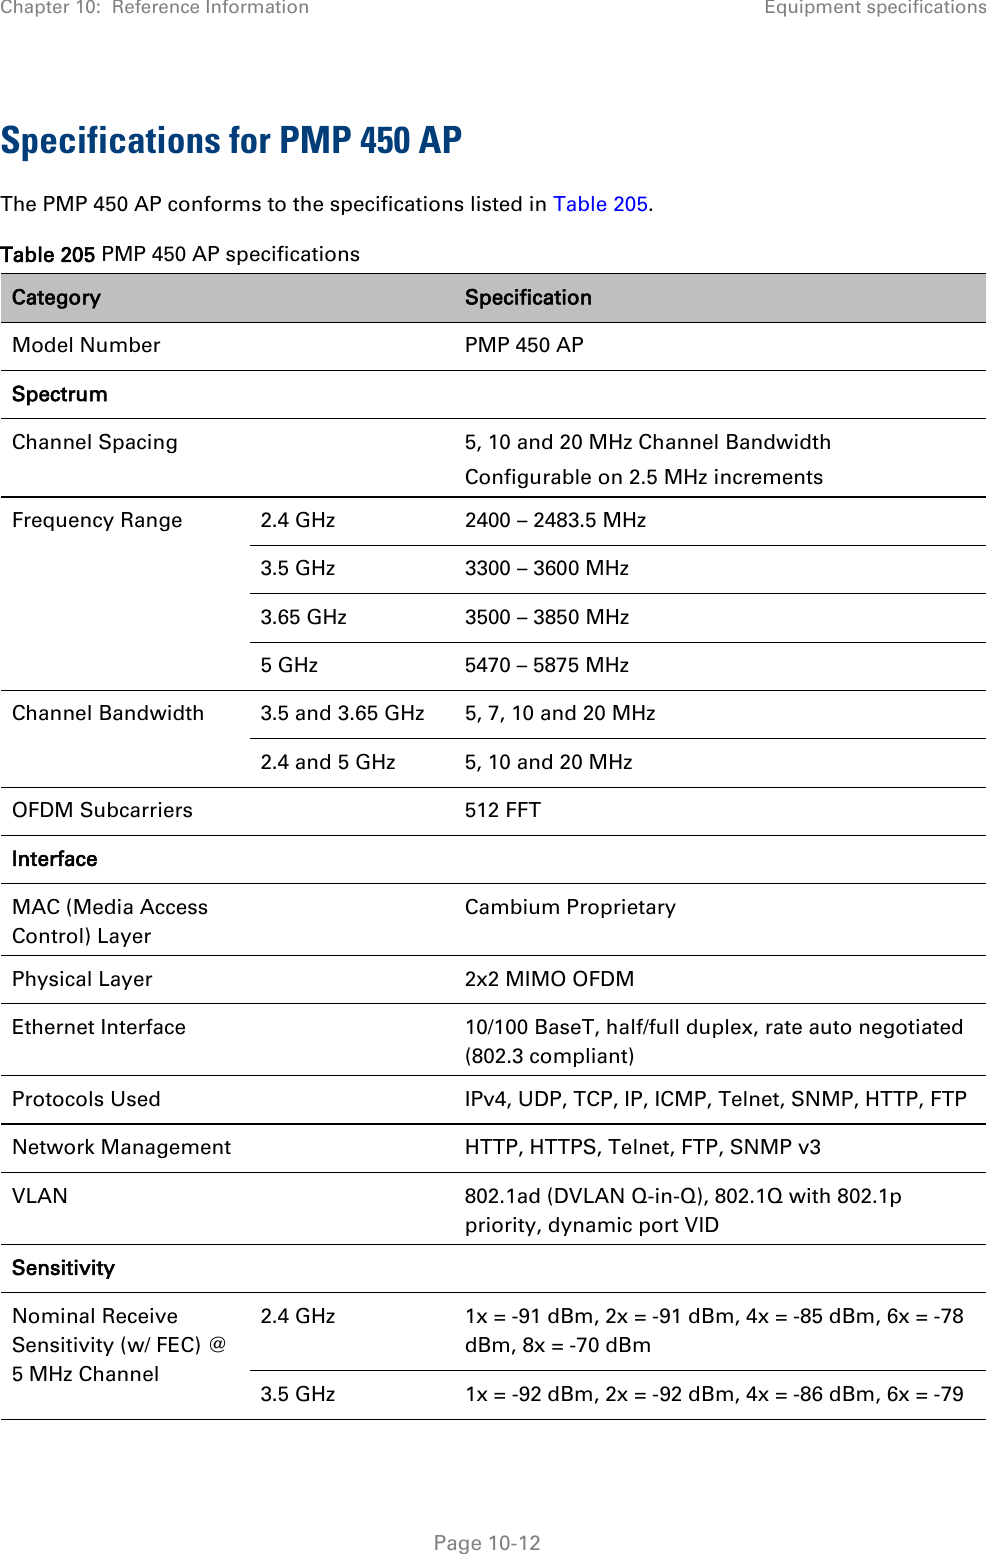 Chapter 10:  Reference Information Equipment specifications   Page 10-12 Specifications for PMP 450 AP The PMP 450 AP conforms to the specifications listed in Table 205. Table 205 PMP 450 AP specifications Category  Specification Model Number    PMP 450 AP Spectrum    Channel Spacing    5, 10 and 20 MHz Channel Bandwidth Configurable on 2.5 MHz increments Frequency Range 2.4 GHz 2400 – 2483.5 MHz 3.5 GHz 3300 – 3600 MHz  3.65 GHz 3500 – 3850 MHz  5 GHz 5470 – 5875 MHz Channel Bandwidth 3.5 and 3.65 GHz 5, 7, 10 and 20 MHz 2.4 and 5 GHz 5, 10 and 20 MHz OFDM Subcarriers  512 FFT Interface    MAC (Media Access Control) Layer  Cambium Proprietary Physical Layer    2x2 MIMO OFDM Ethernet Interface    10/100 BaseT, half/full duplex, rate auto negotiated (802.3 compliant) Protocols Used    IPv4, UDP, TCP, IP, ICMP, Telnet, SNMP, HTTP, FTP Network Management    HTTP, HTTPS, Telnet, FTP, SNMP v3 VLAN    802.1ad (DVLAN Q-in-Q), 802.1Q with 802.1p priority, dynamic port VID Sensitivity     Nominal Receive Sensitivity (w/ FEC) @ 5 MHz Channel 2.4 GHz   1x = -91 dBm, 2x = -91 dBm, 4x = -85 dBm, 6x = -78 dBm, 8x = -70 dBm 3.5 GHz 1x = -92 dBm, 2x = -92 dBm, 4x = -86 dBm, 6x = -79 